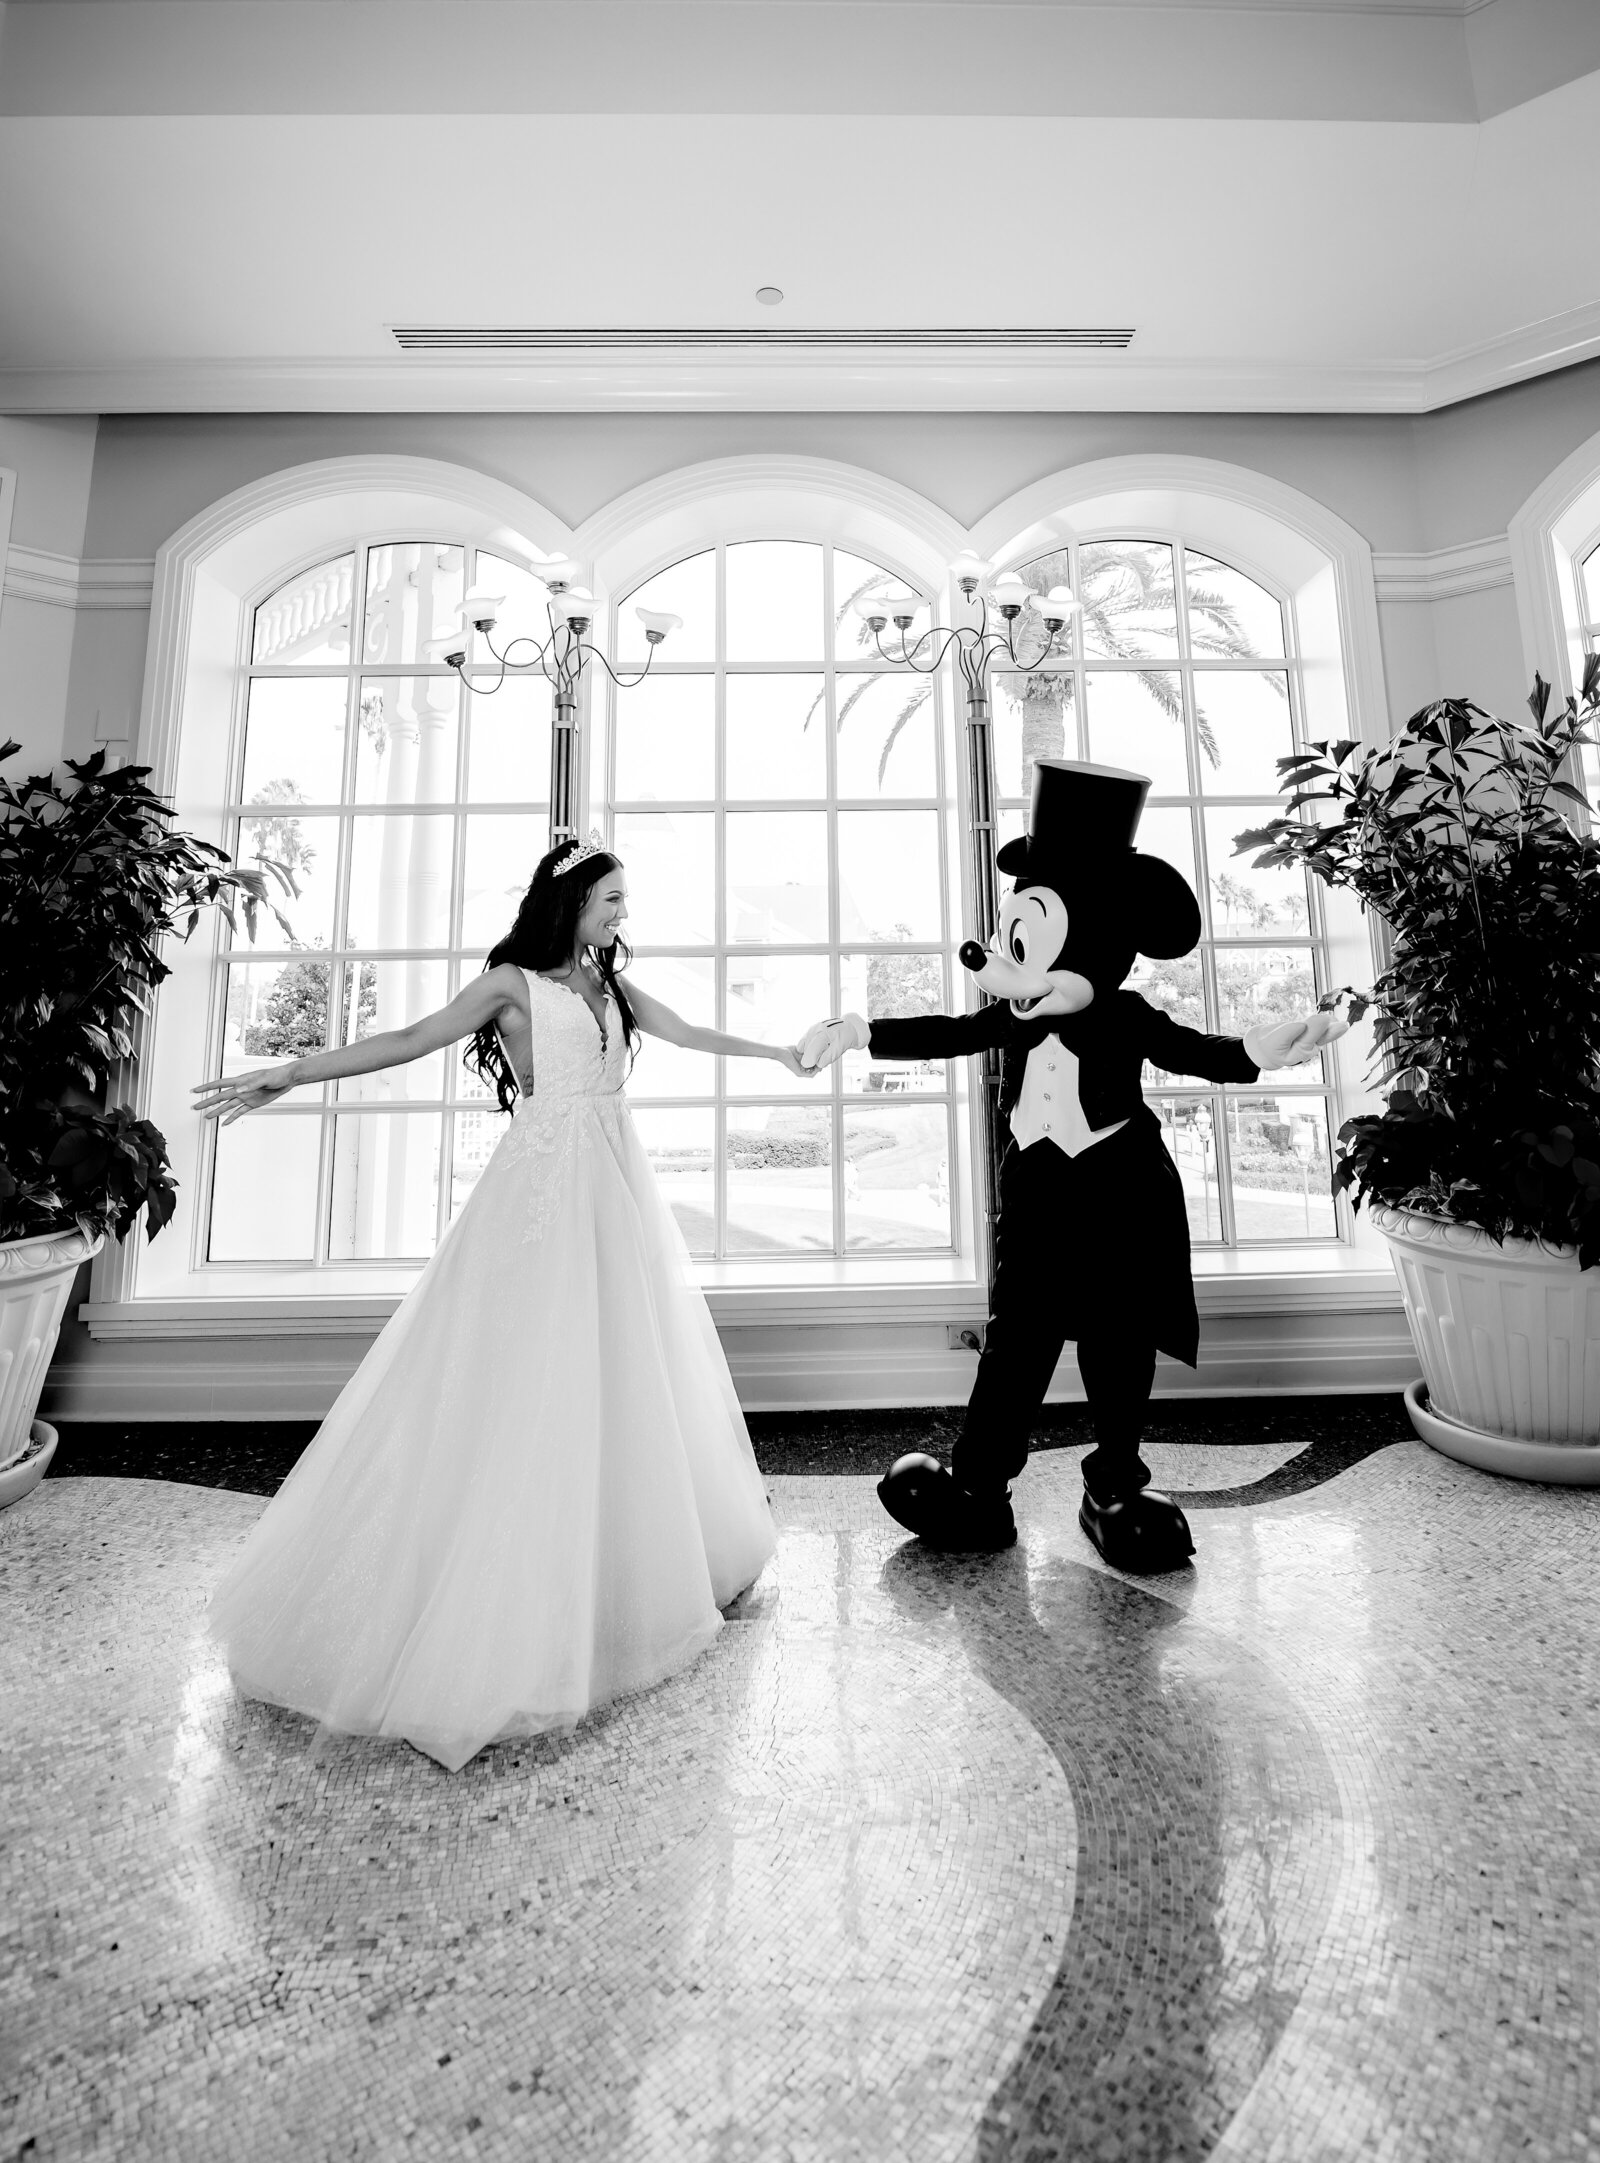 Create magical memories that last a lifetime with our Disney World wedding photography. Let us capture the joy and enchantment of your special day in the most magical place on earth.